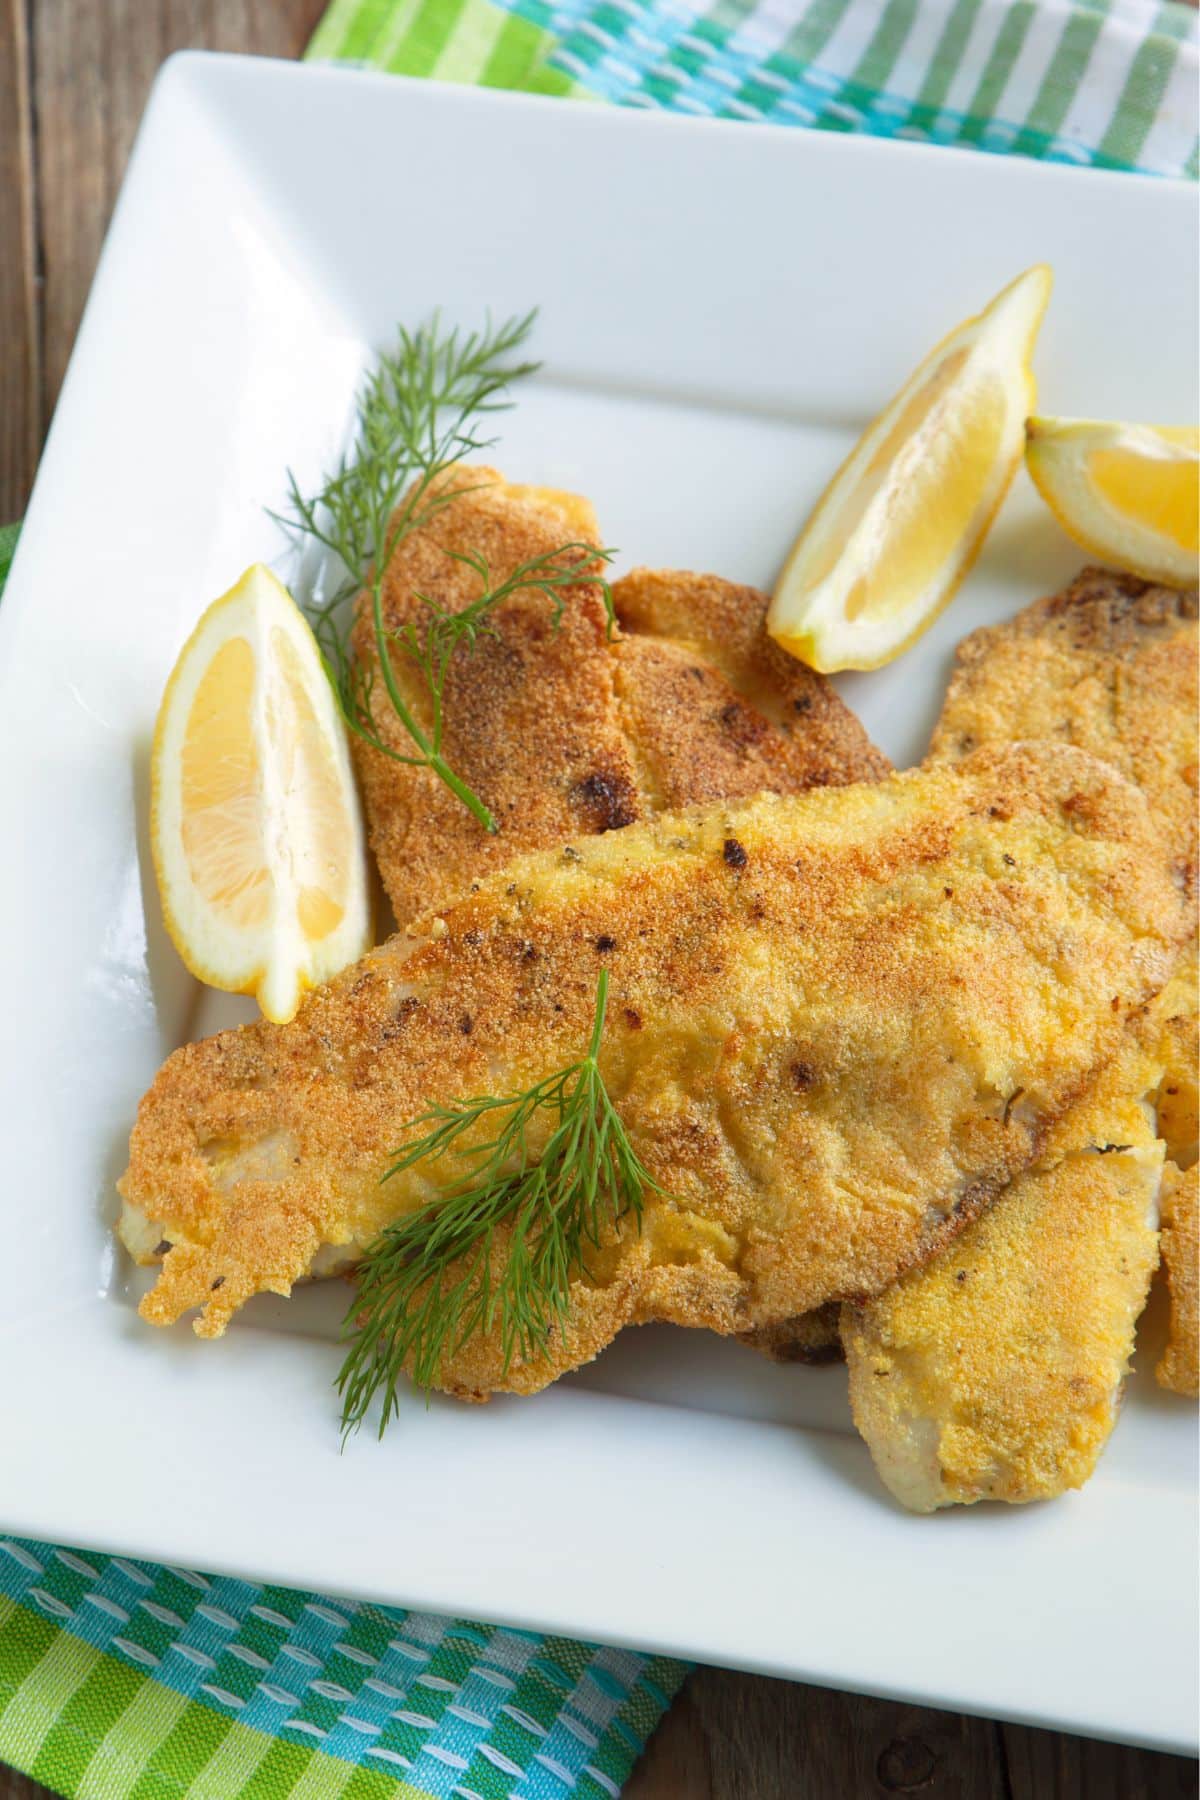 Fried fish in cornmeal batter with lemon and dill.